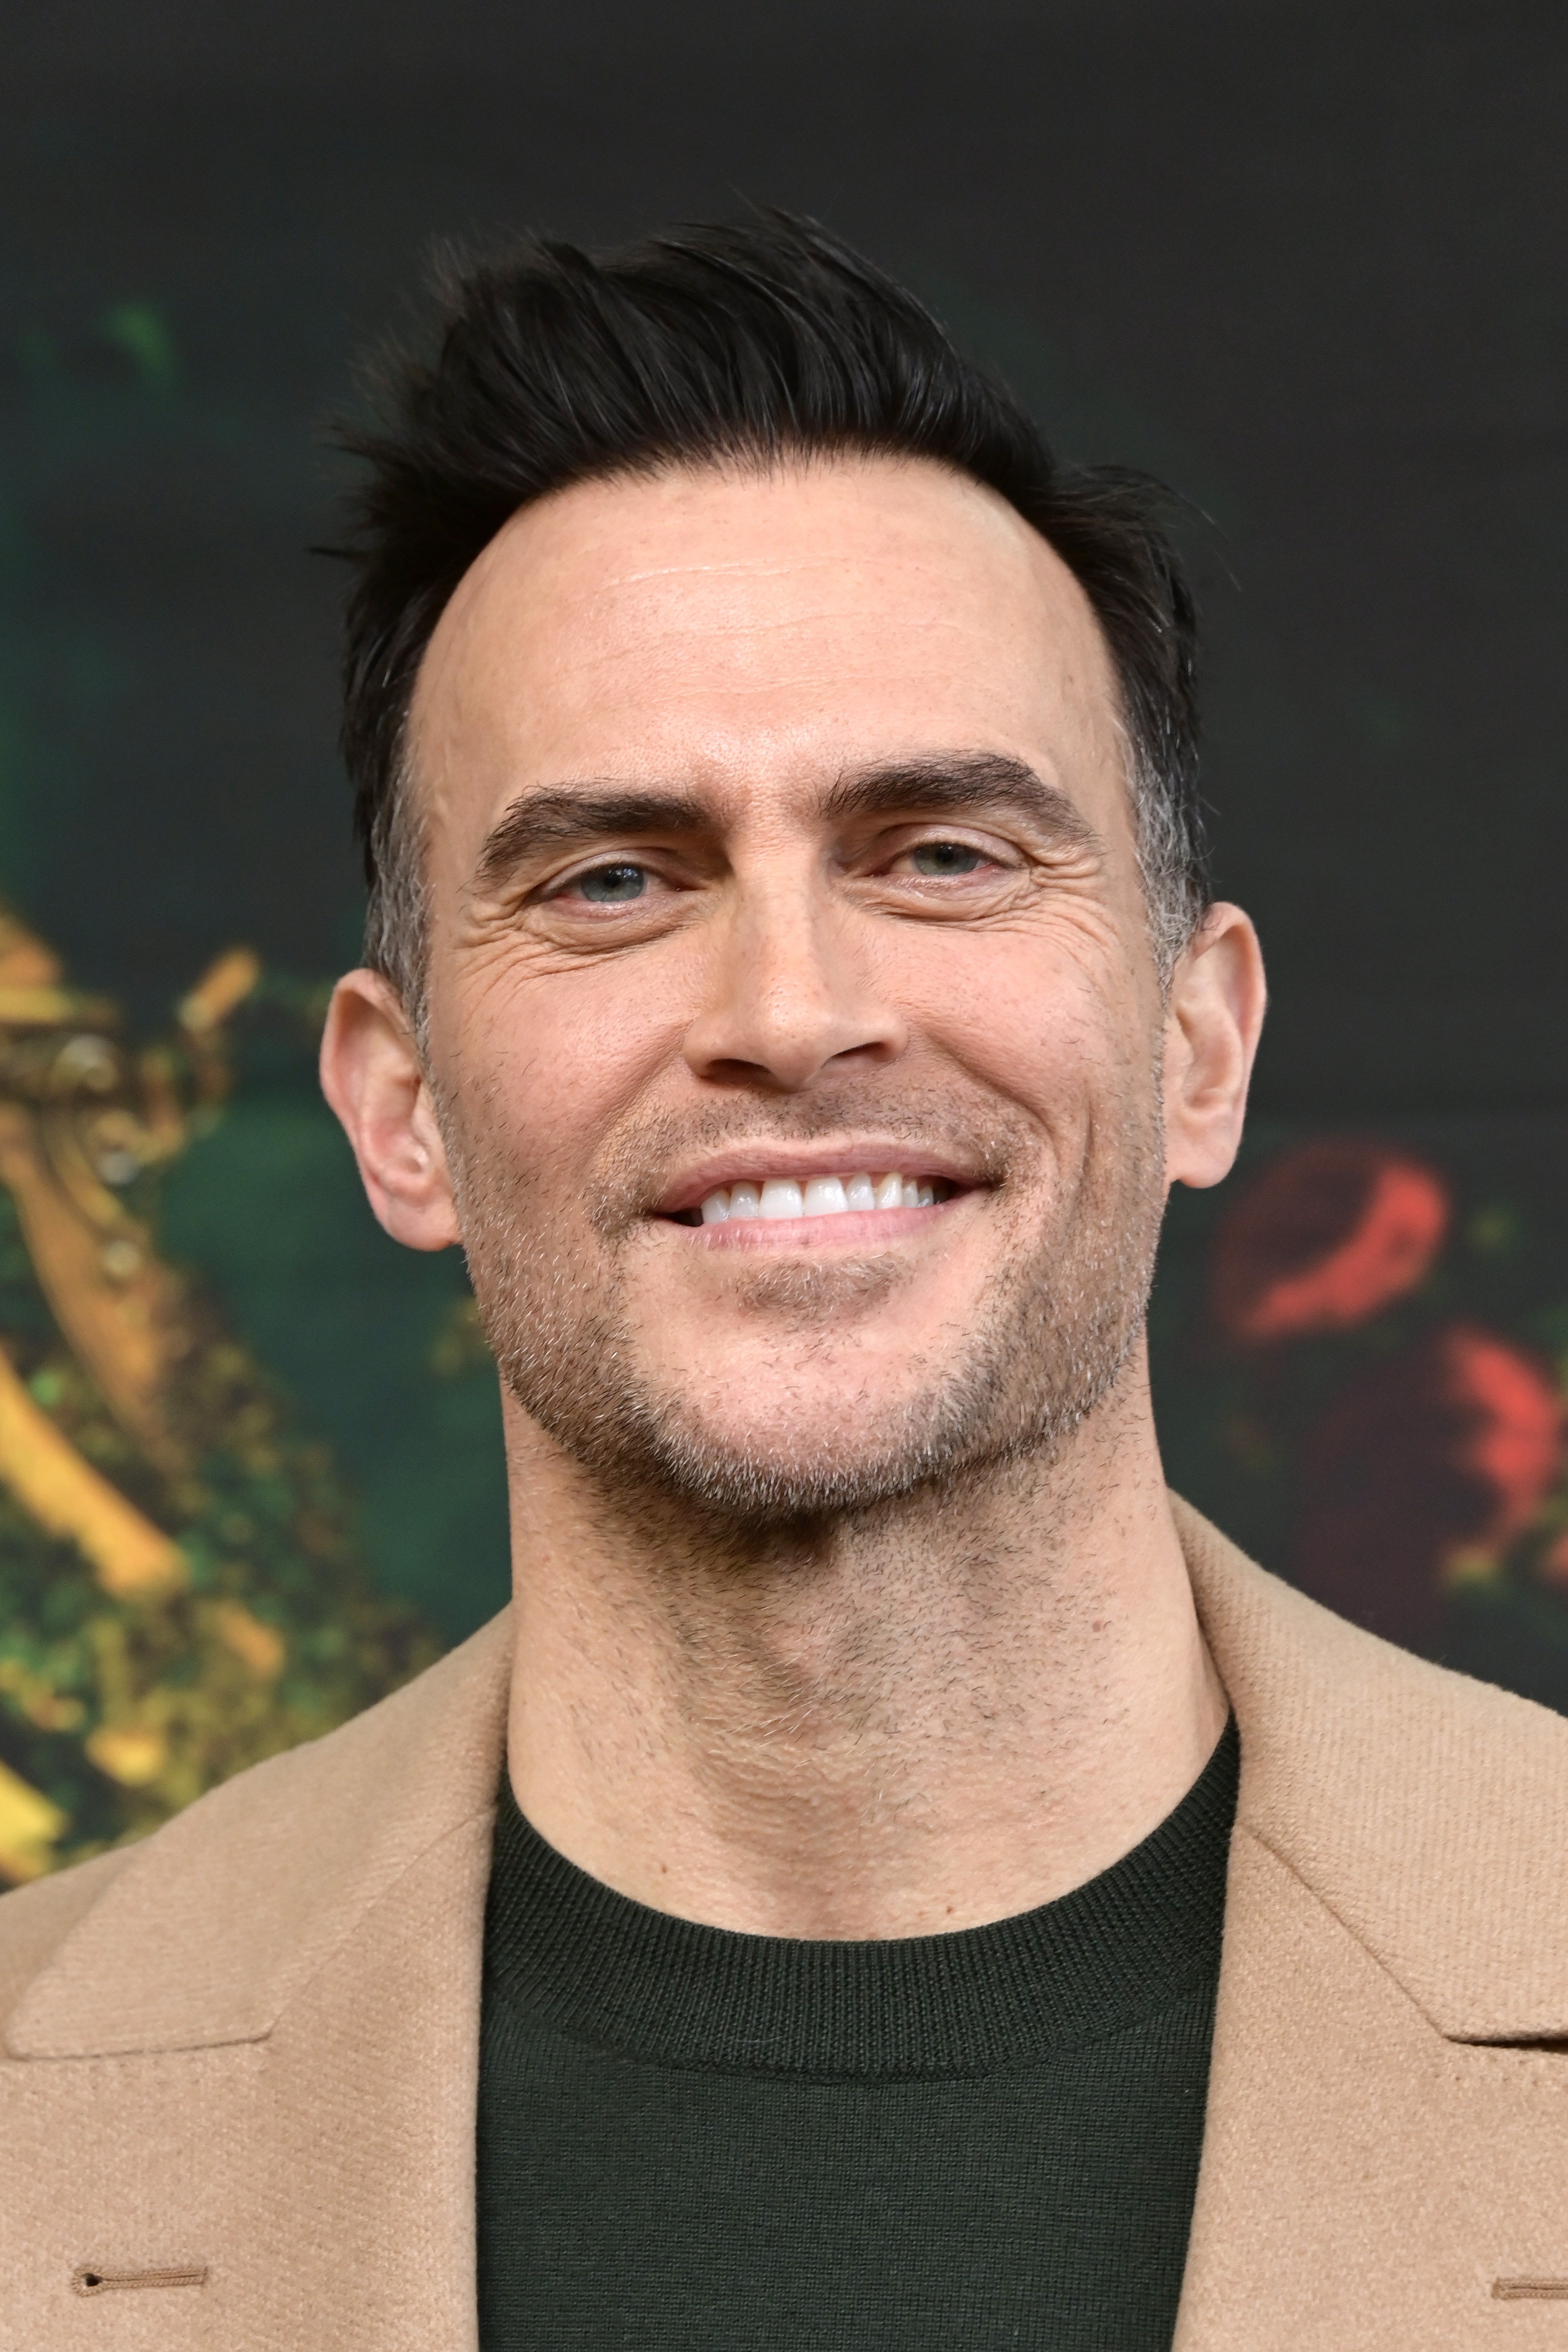 Cheyenne Jackson at the opening night performance of "The Secret Garden" on February 26, 2023, in Los Angeles, California. | Source: Getty Images